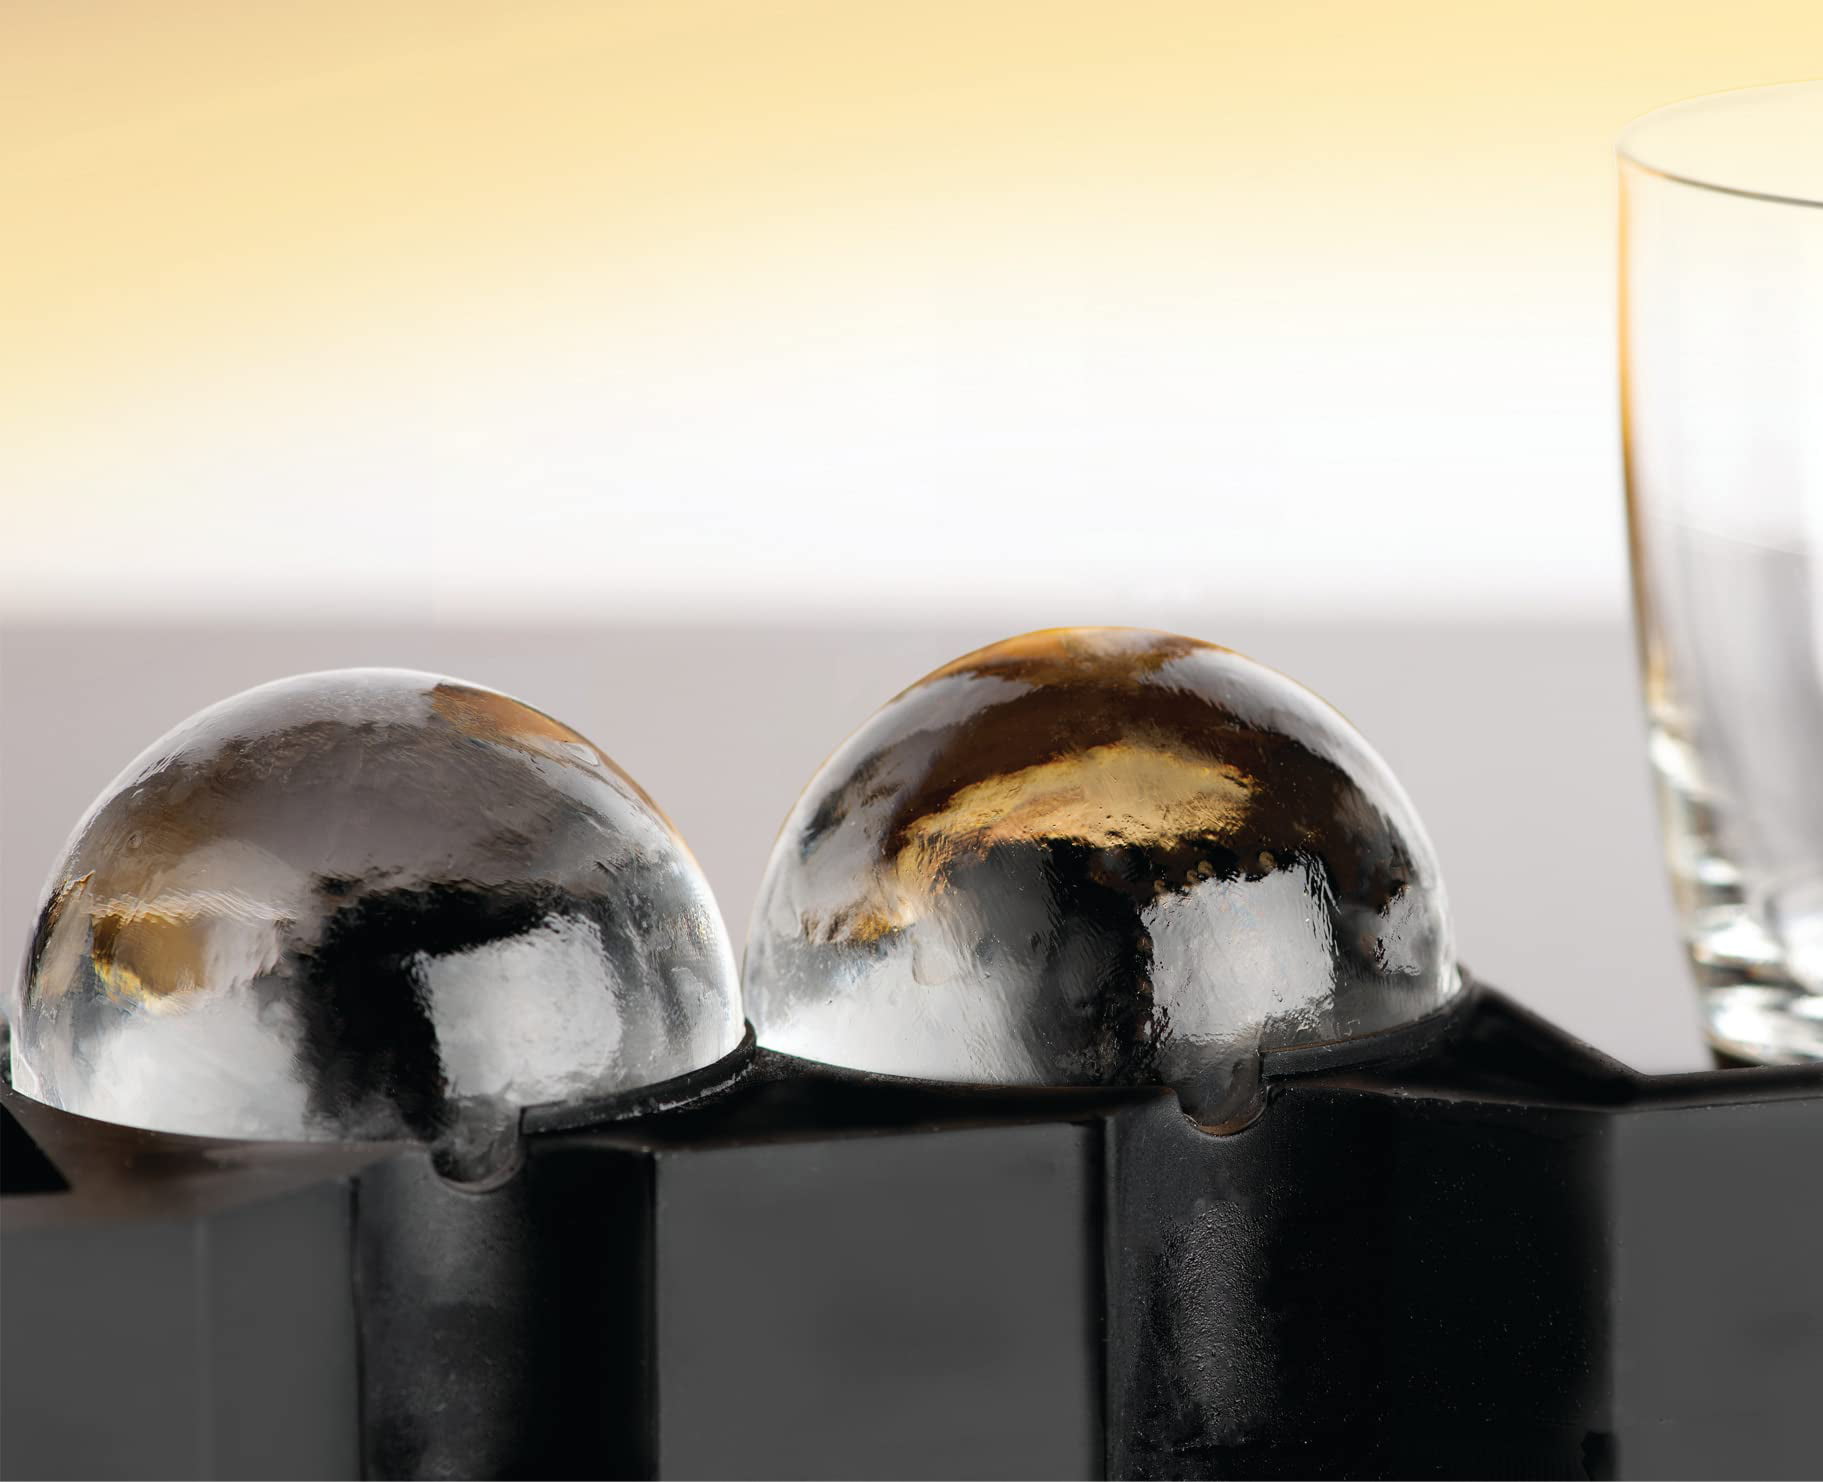 This GE-Backed Ice Maker Creates Crystal Clear Spheres for Your Home Bar